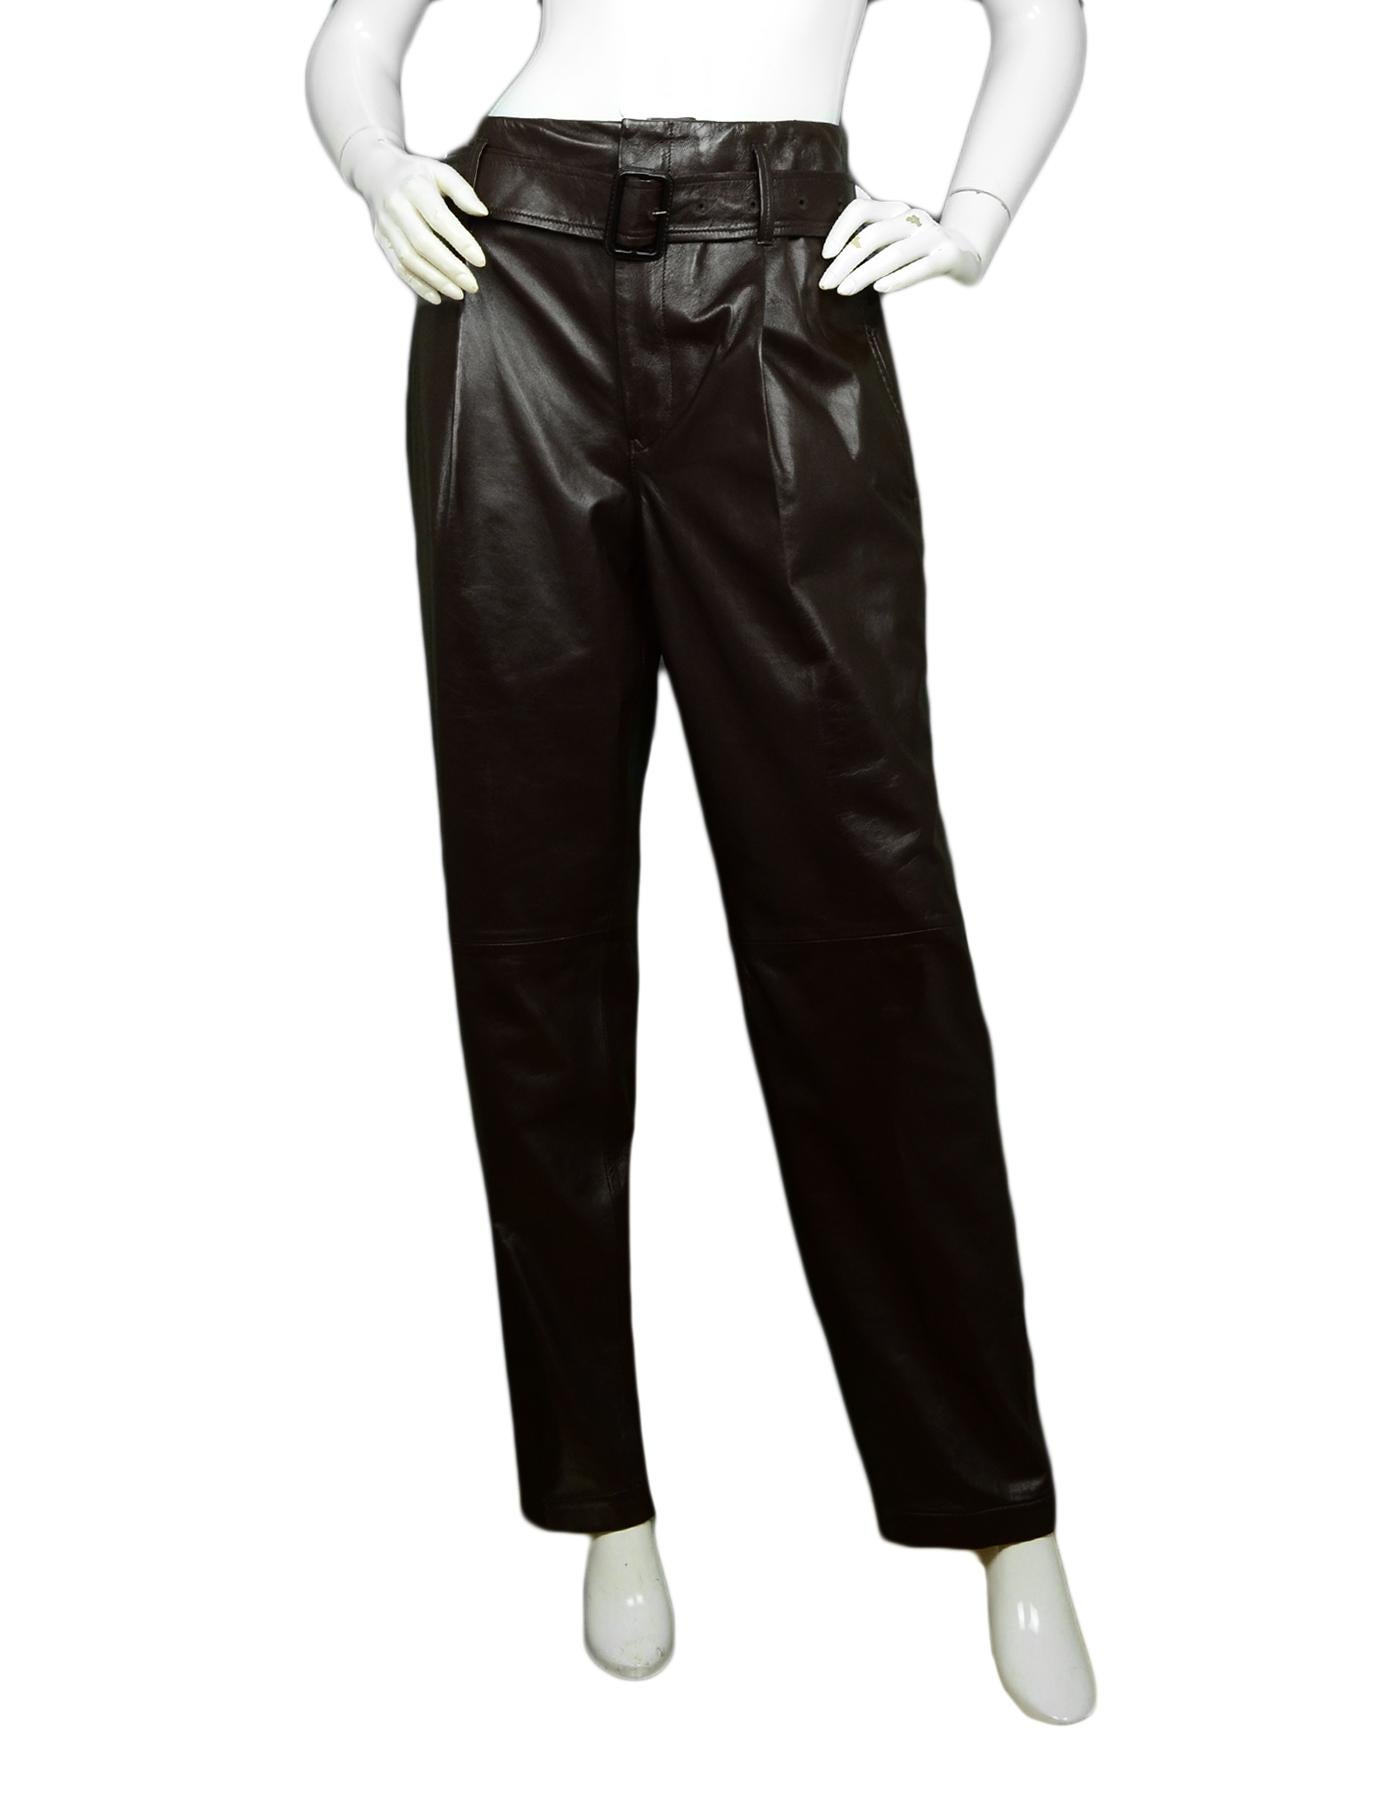 Polo by Ralph Lauren Brown Leather Slacks w/ Belt sz 4 NWT

Made In: India
Color: Brown
Materials: 100% Lambskin Leather
Lining: 100% Cupro fabric
Closure/Opening: Front zip
Overall Condition: New with tag (NWT)
Estimated Retail: $998 +